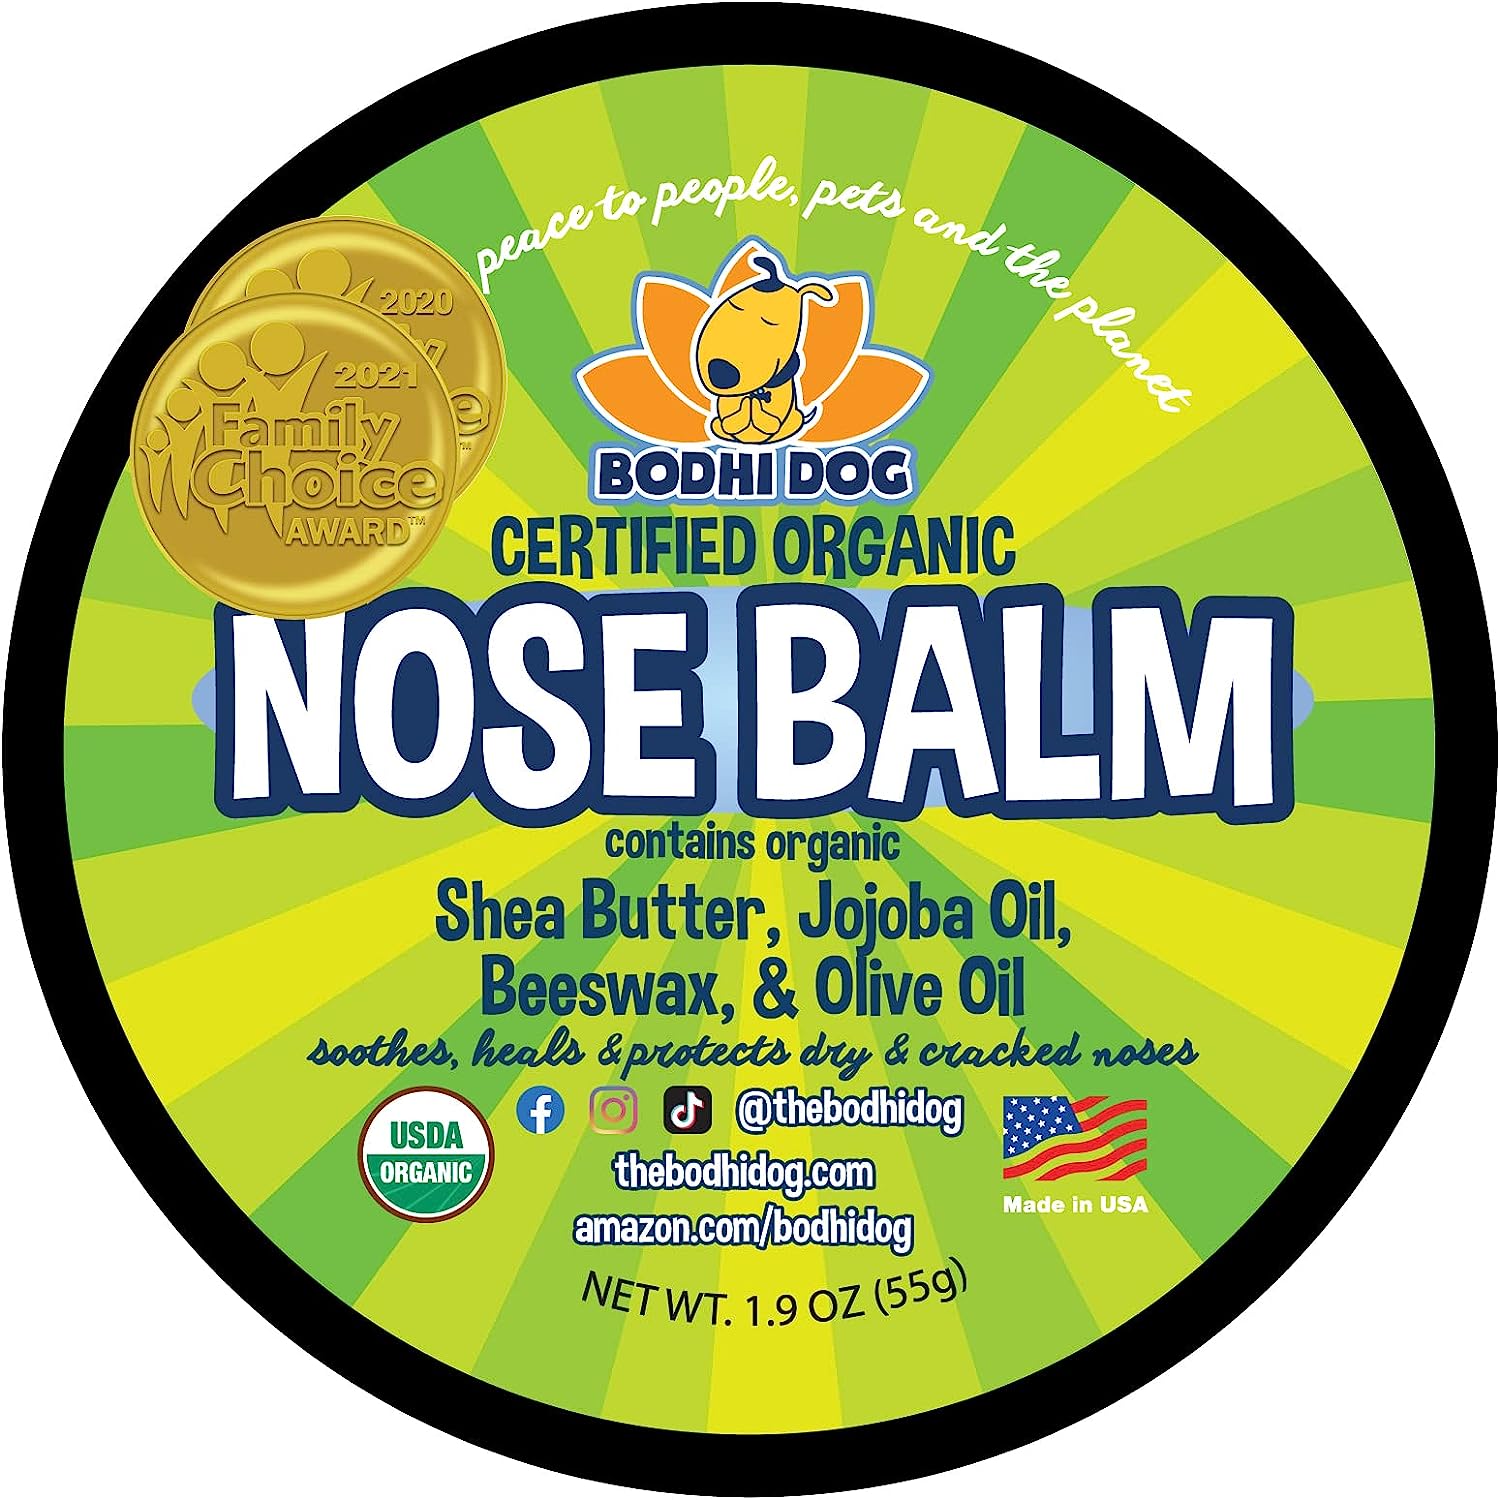 Bodhi Dog Organic Nose Balm for Dogs